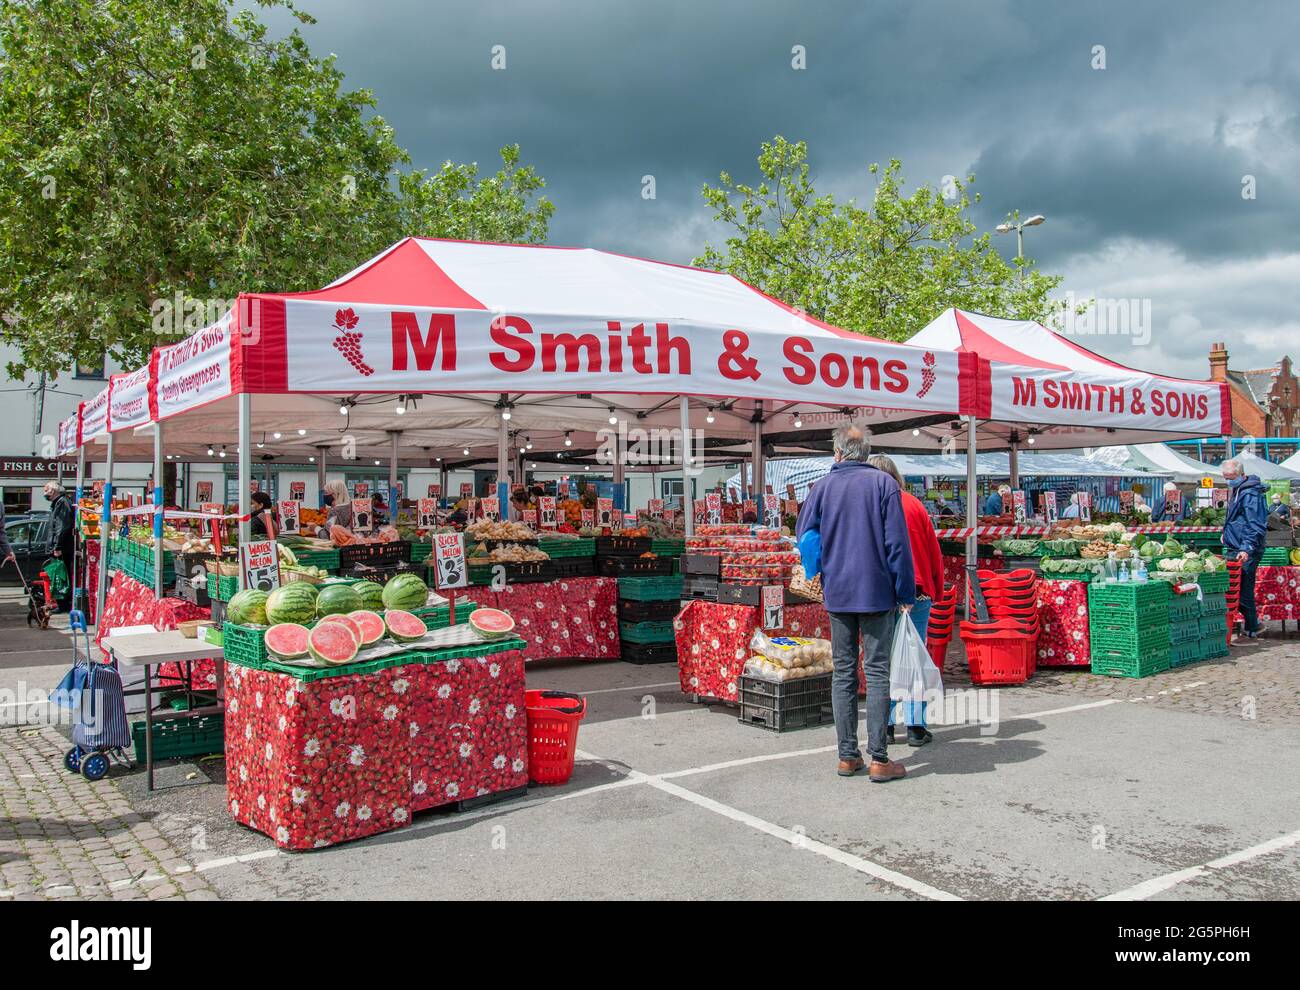 Colourful fruit and veg stall at Thame market, Oxfordshire, England. Stock Photo